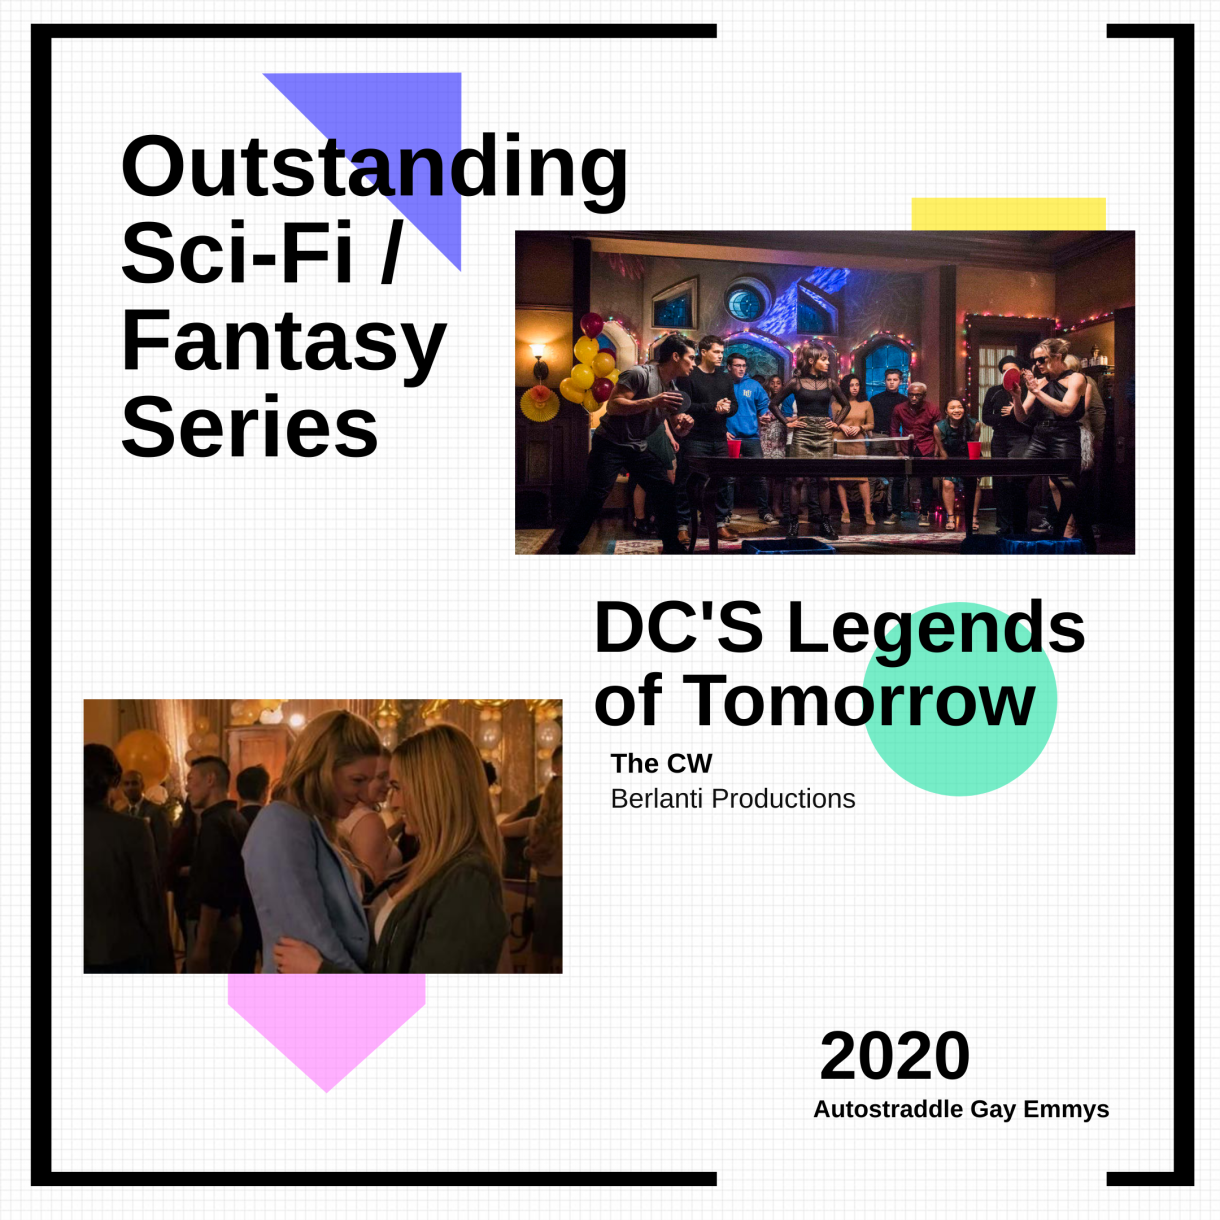 Graphic announcing Outstanding Sci-Fi Fantasy Series: DC's Legends of Tomorrow